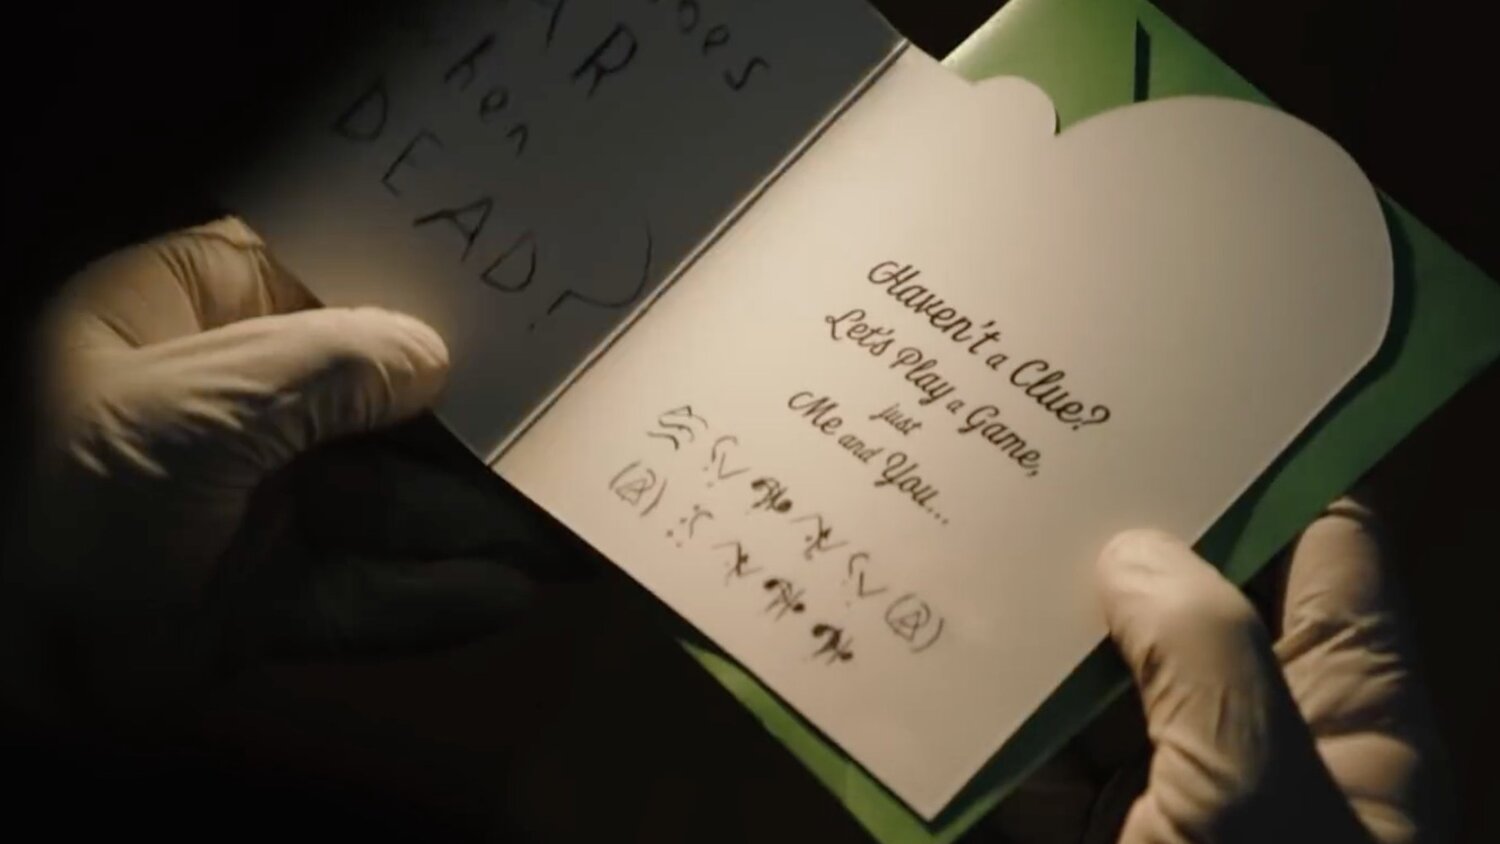 DC Fan Decodes The Riddler's Mysterious Message In The Batman Trailer